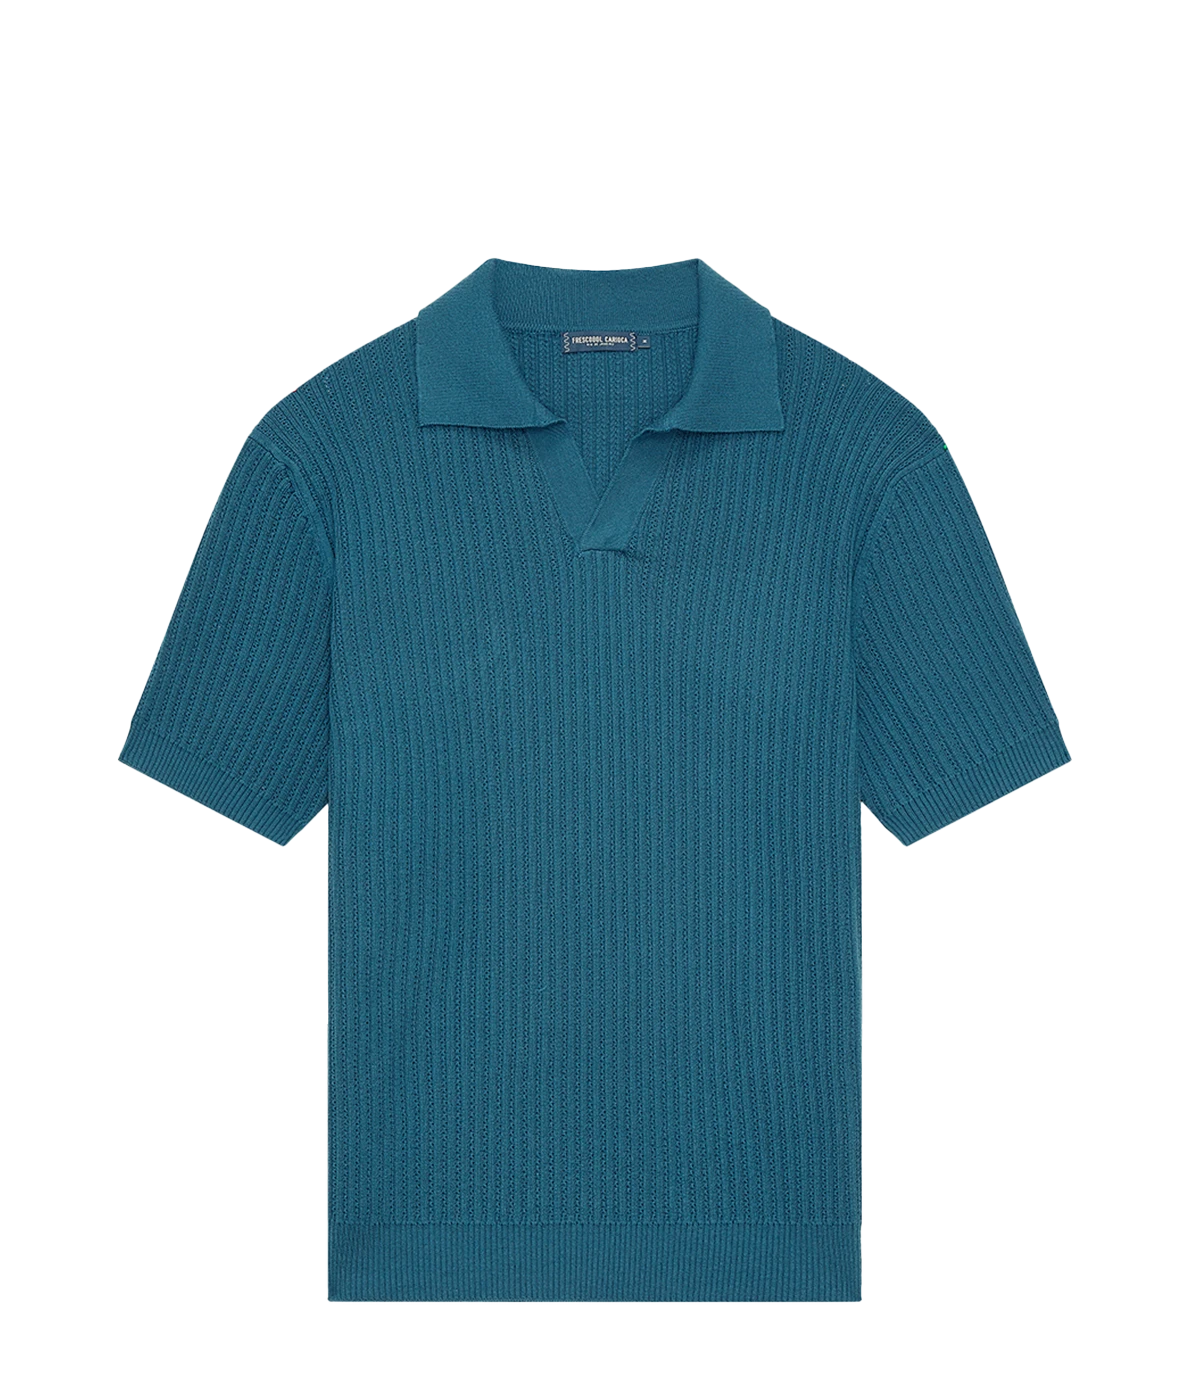 Ribbed knit teal polo with chain stitching, open collar with a half-placket by Frescobol Carioca.